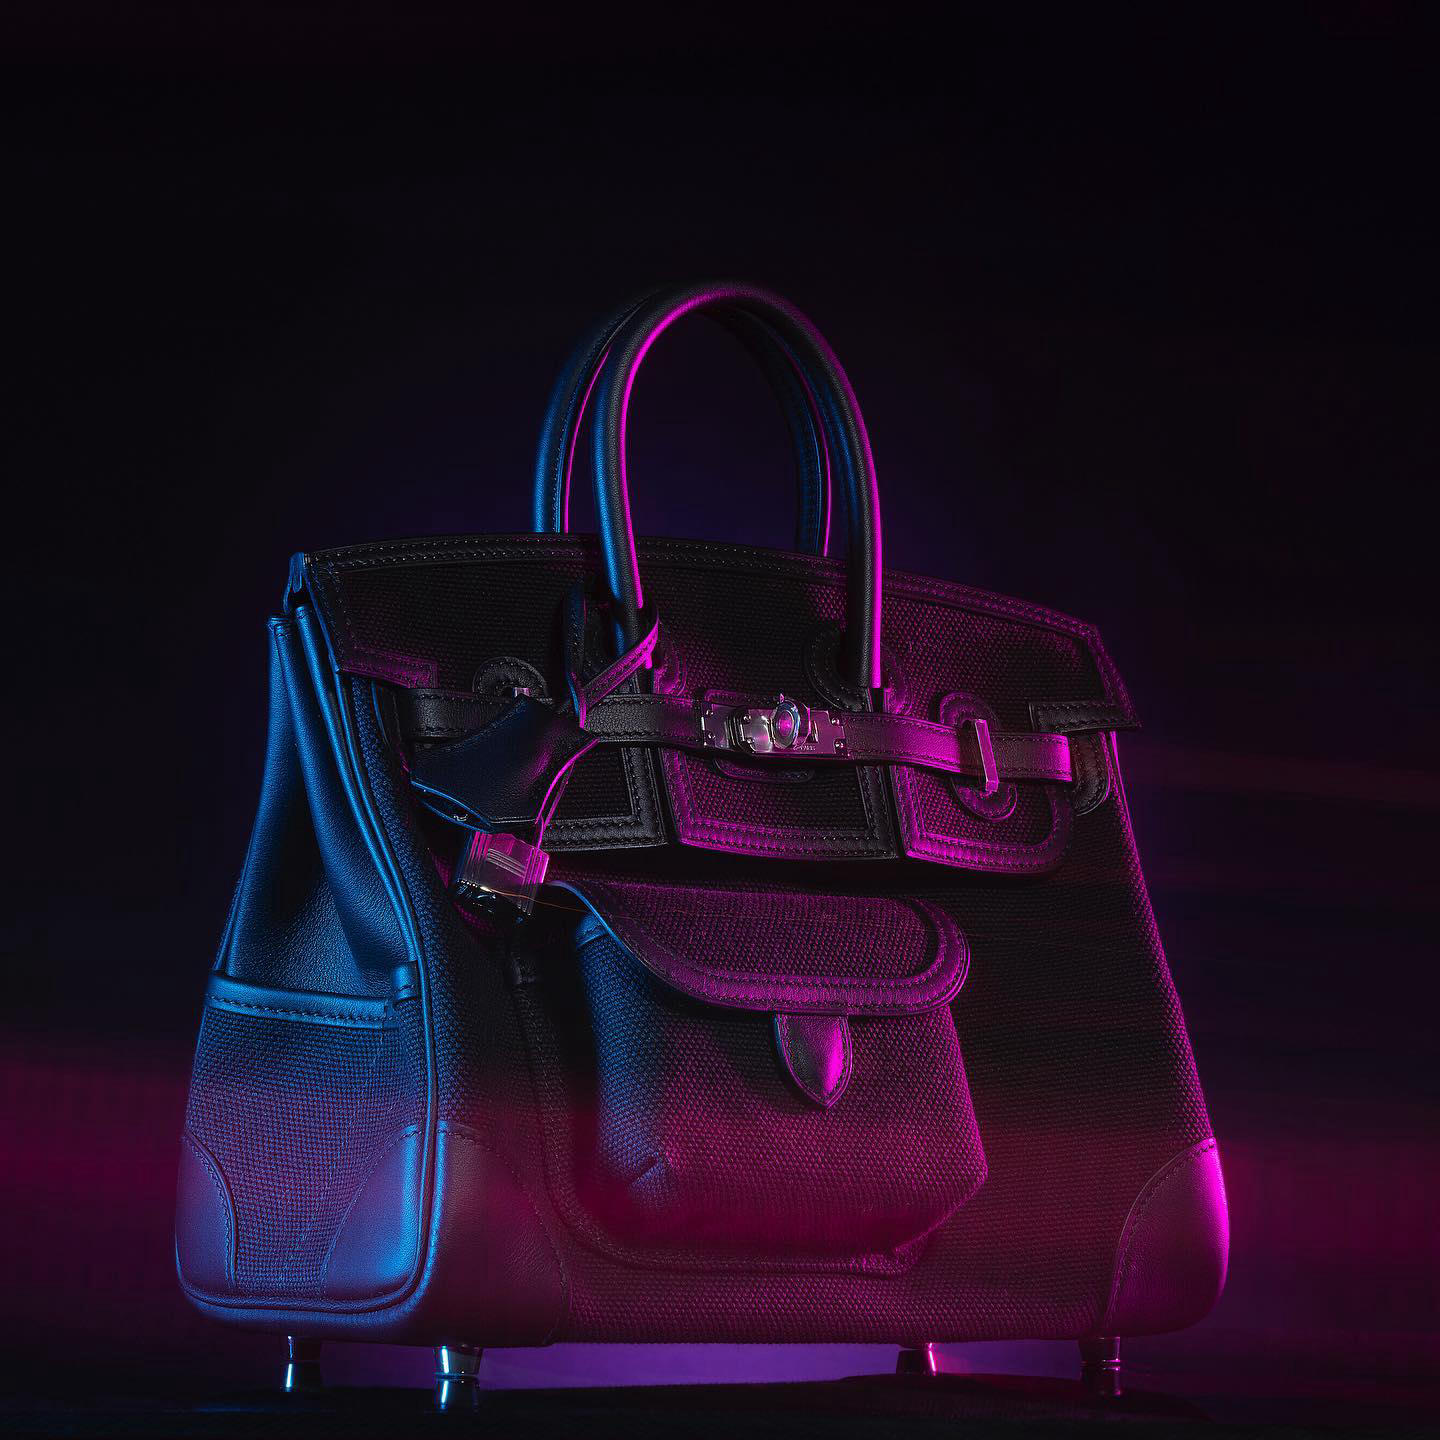 Christie's Handbags - Over the years, Hermès has introduced an array of limited-edition styles, rele